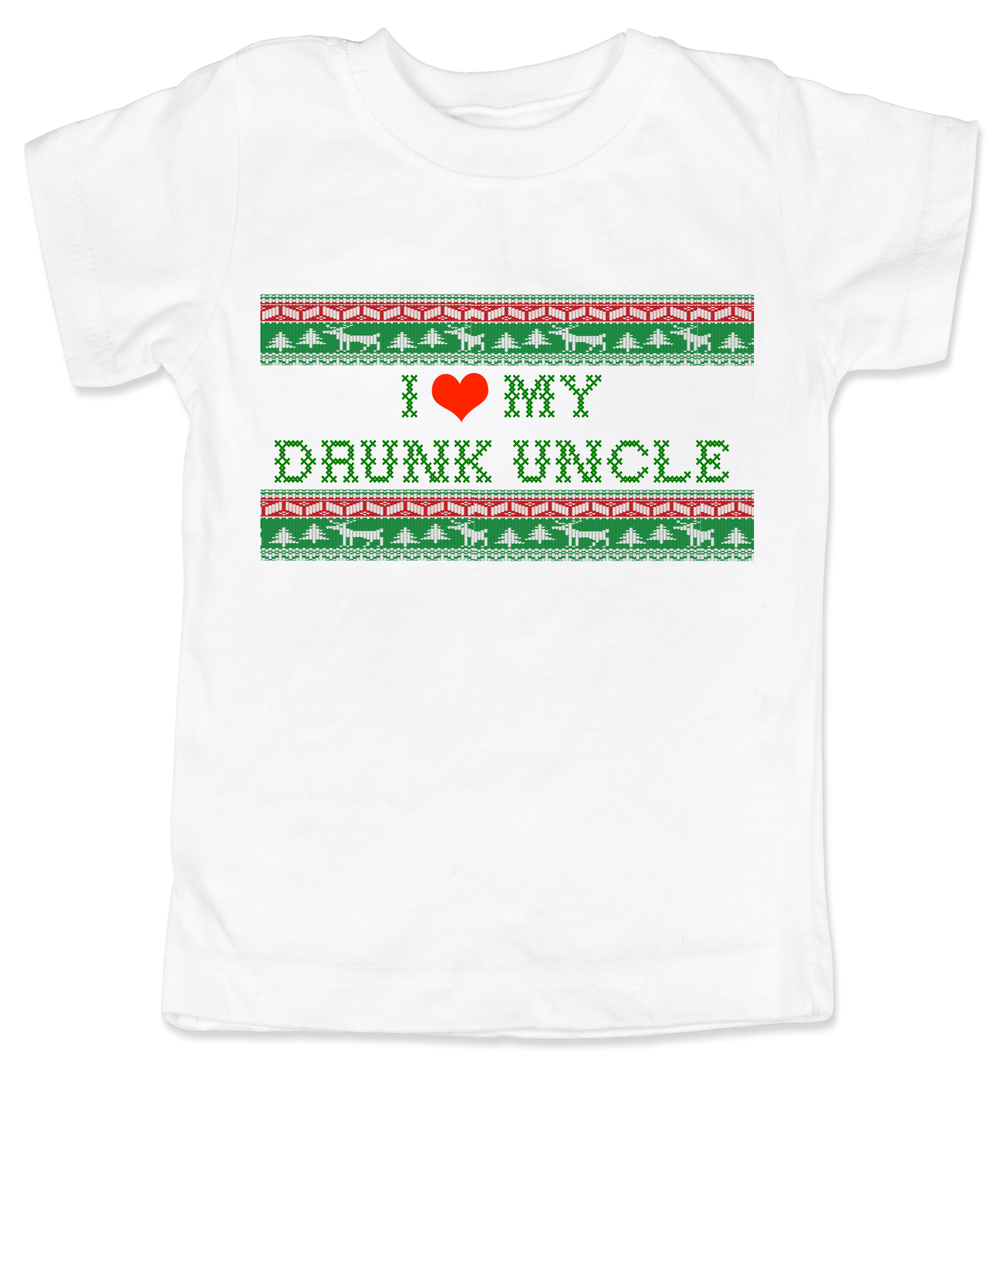 Drunk Uncle - baby onesie and toddler shirt